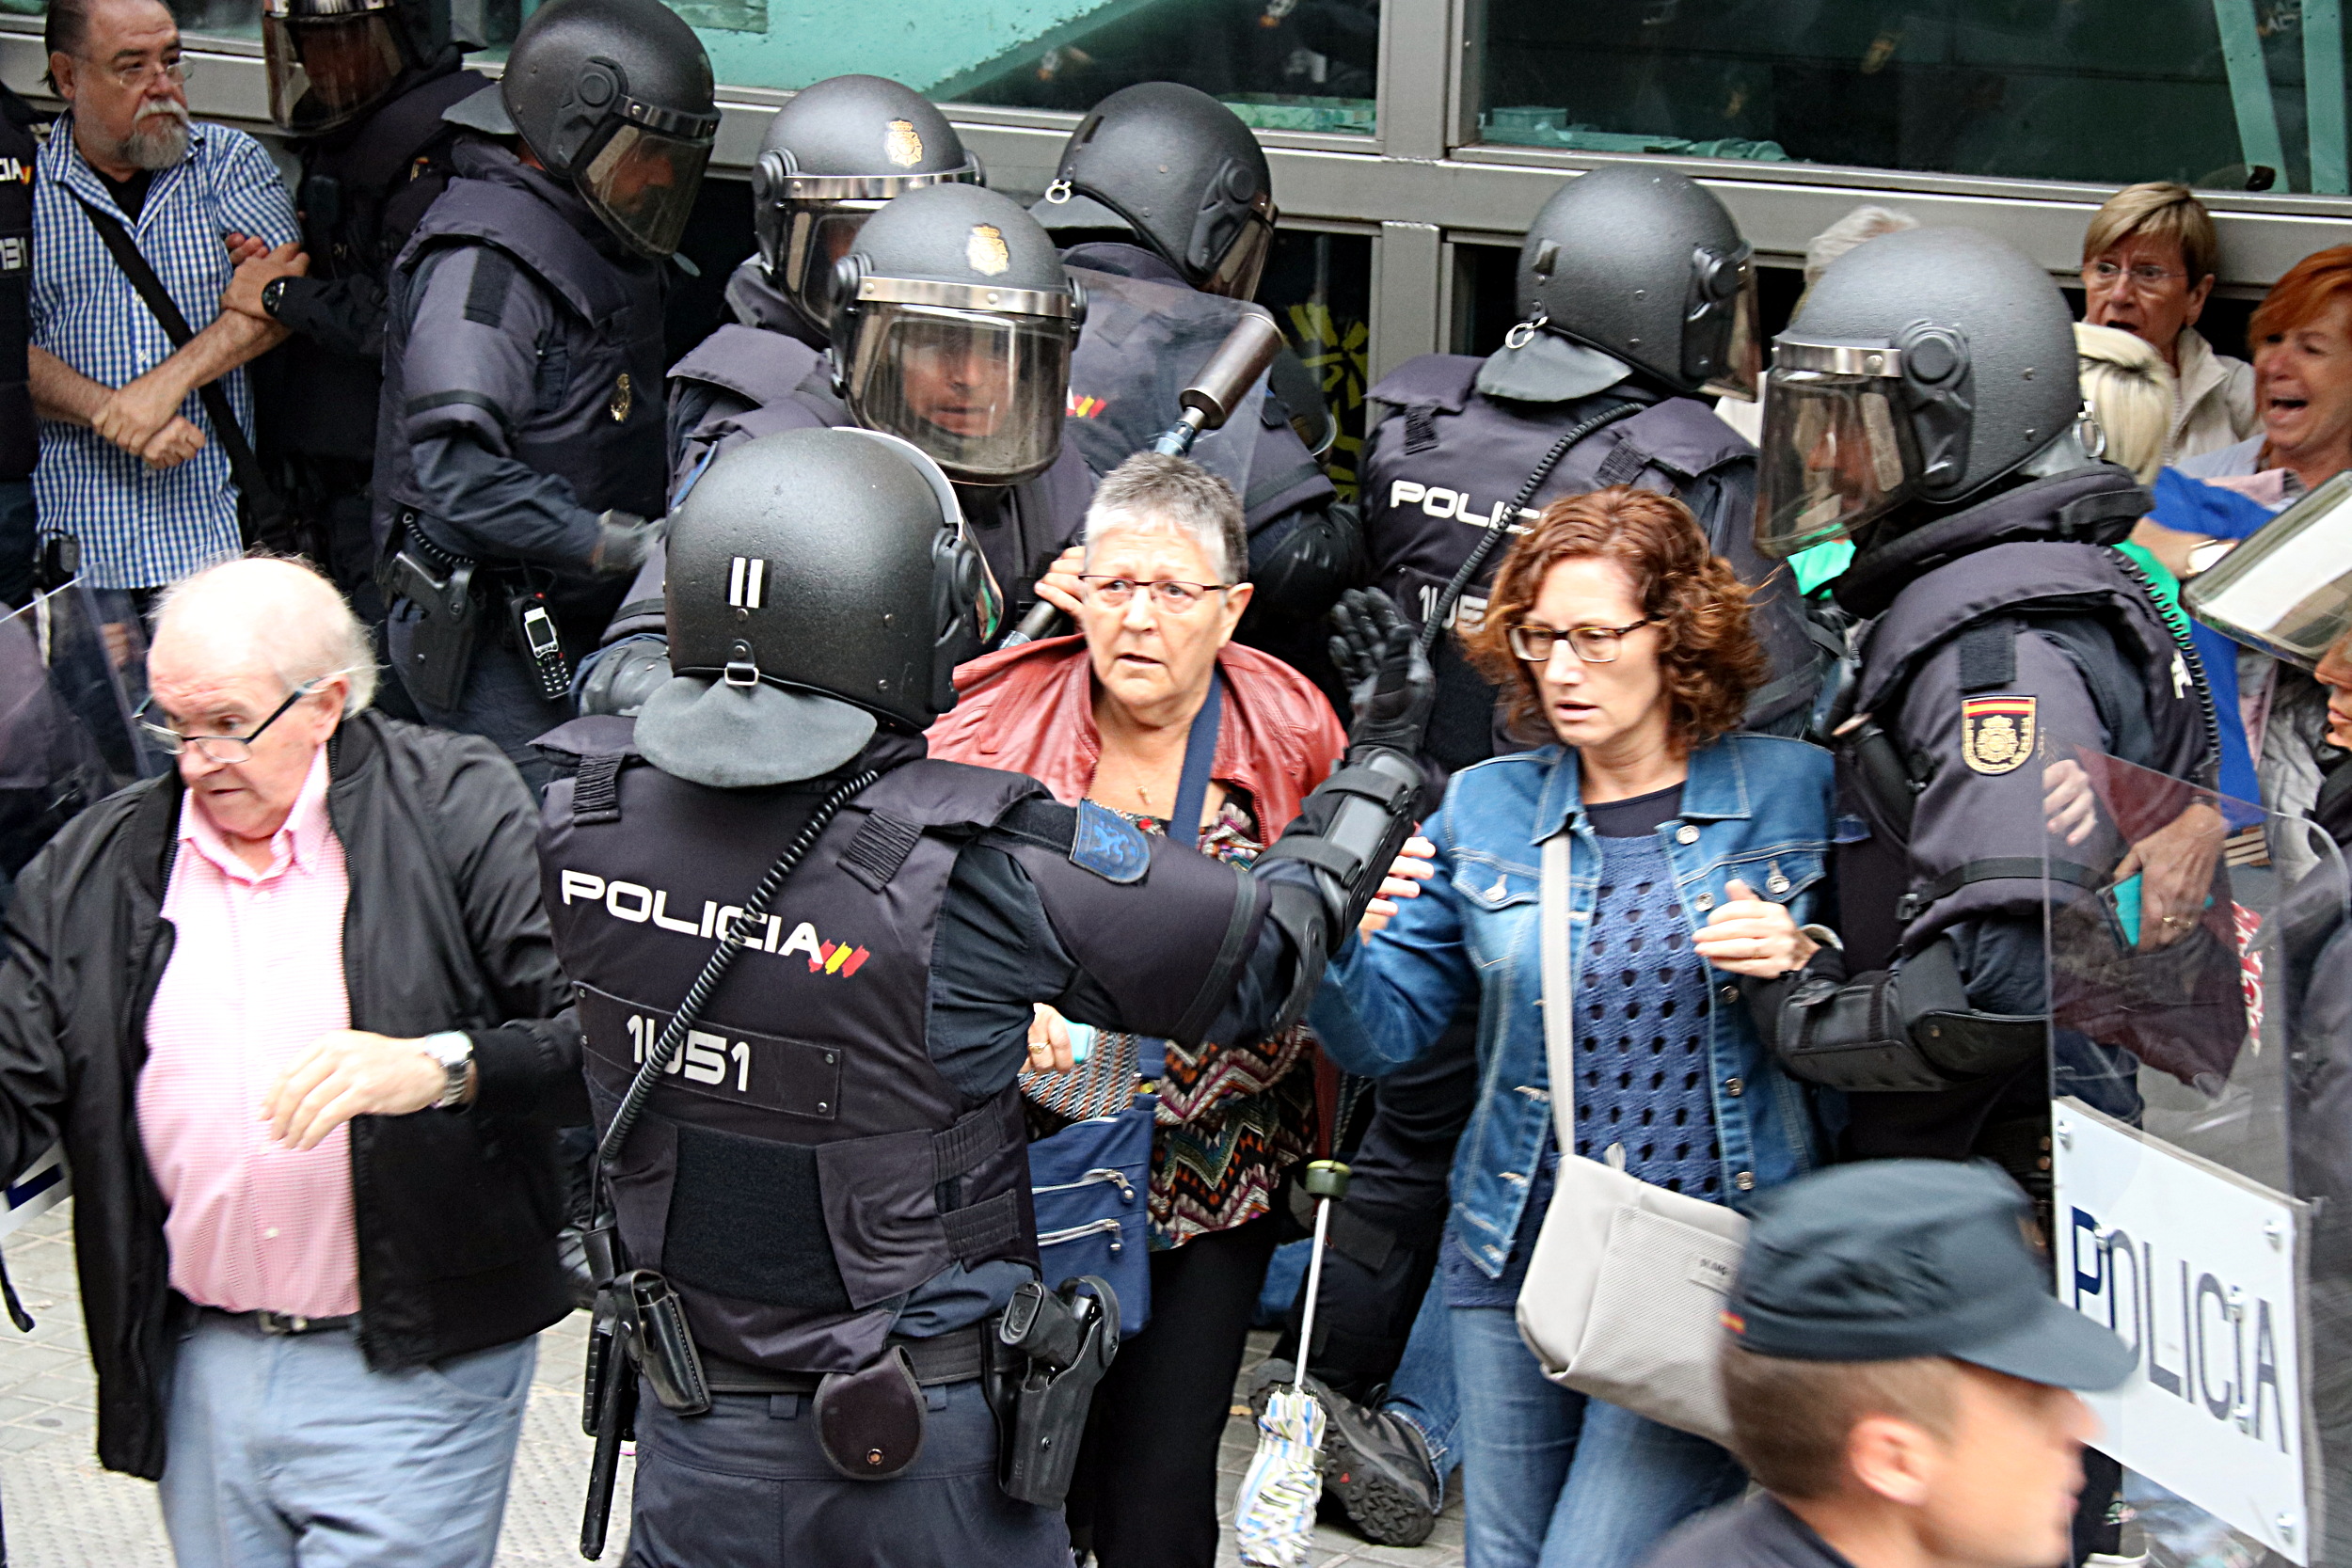 Spanish police officers circle two women outside a polling station on October 1 (by ACN)